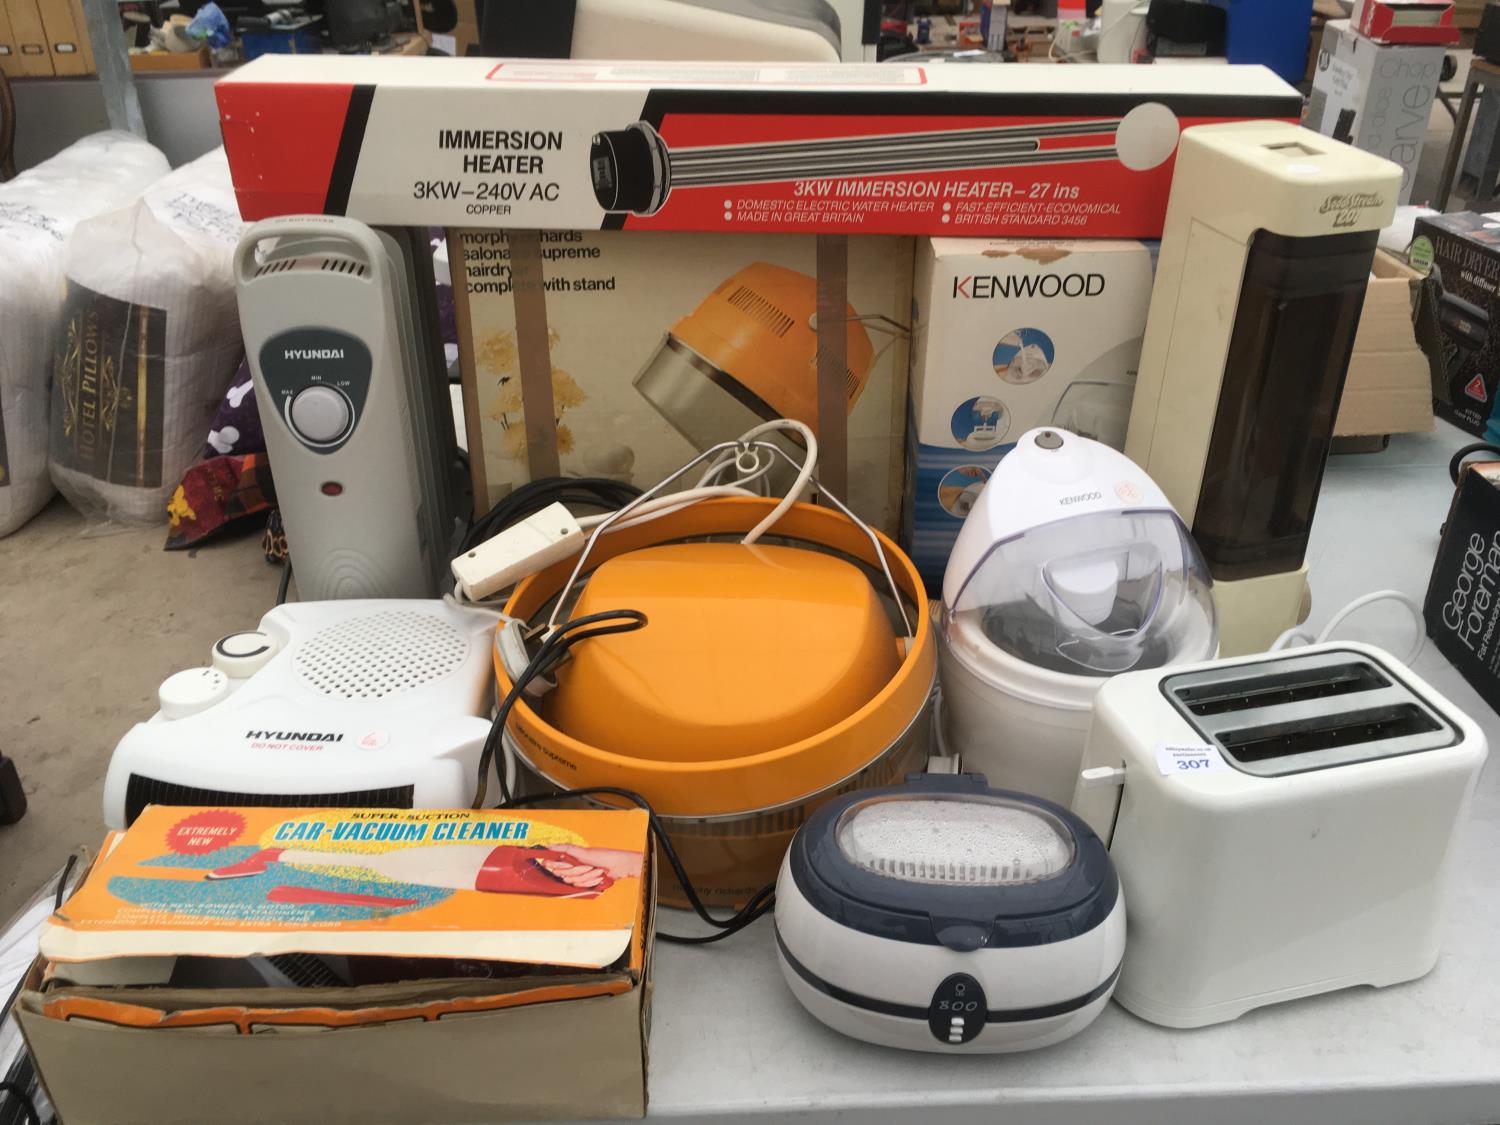 MIXED ELECTRICALS TO INCLUDE A TOASTER, CAR VAC, ICE CREAM MAKER, IMMERSION HEATER, AND AND OIL